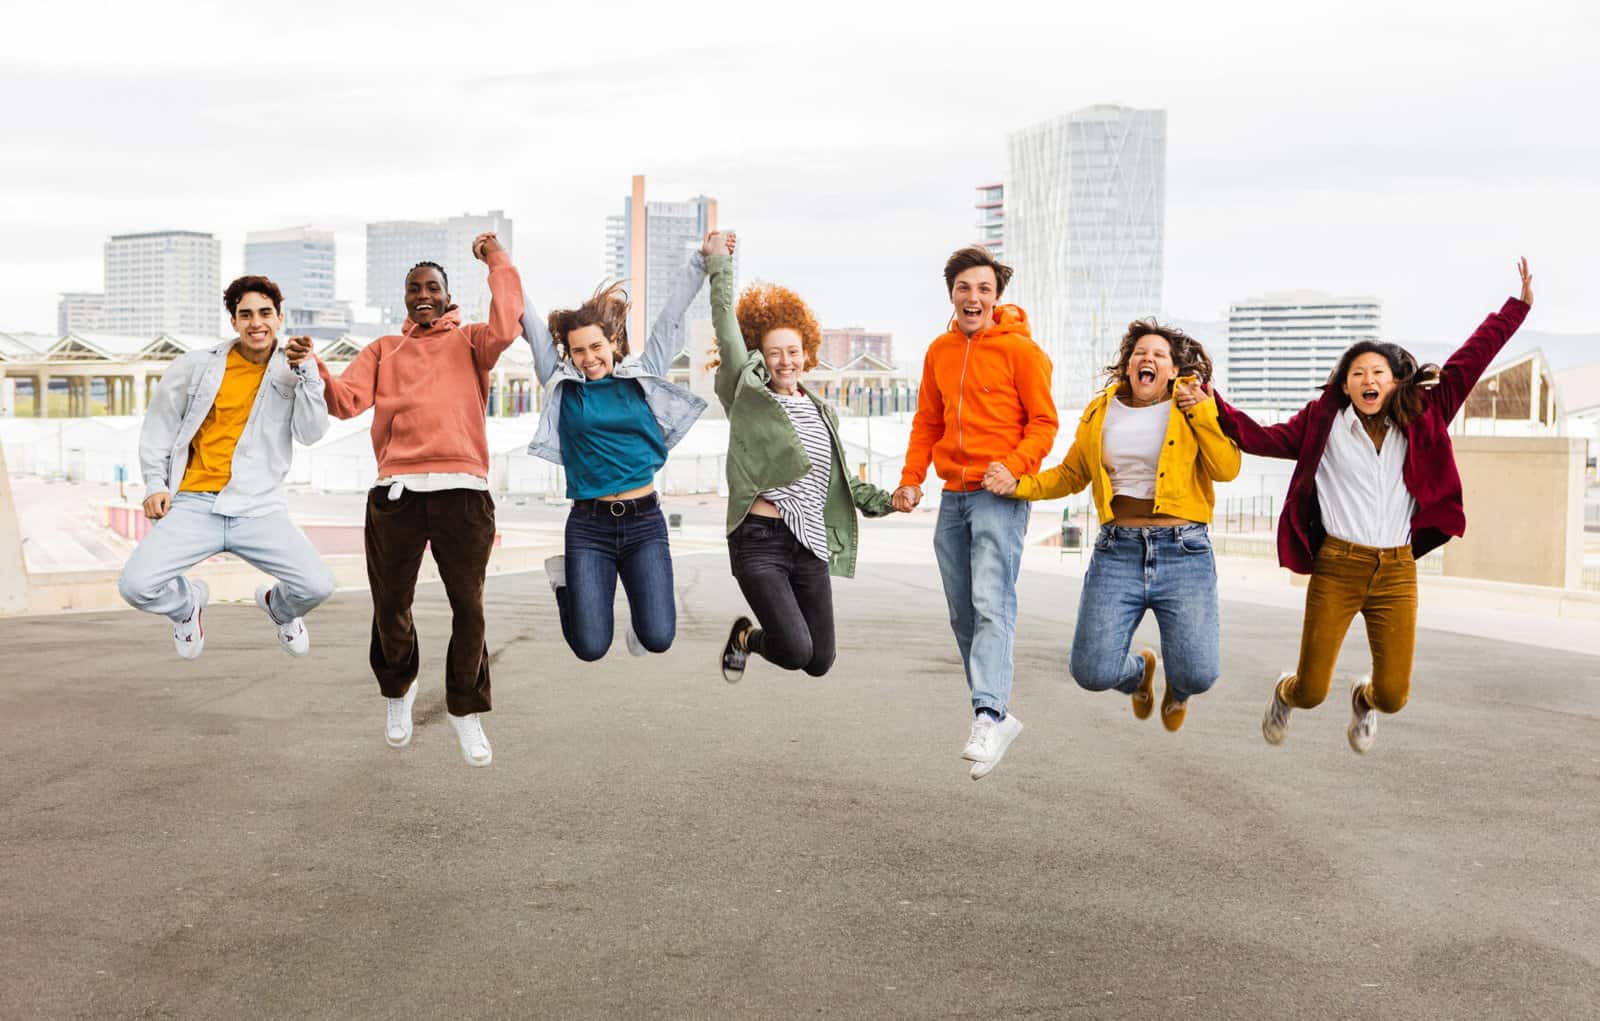 Diverse happy group of young friends celebrating having fun outdoors. Community concept with teenage people jumping holding hands over city urban background